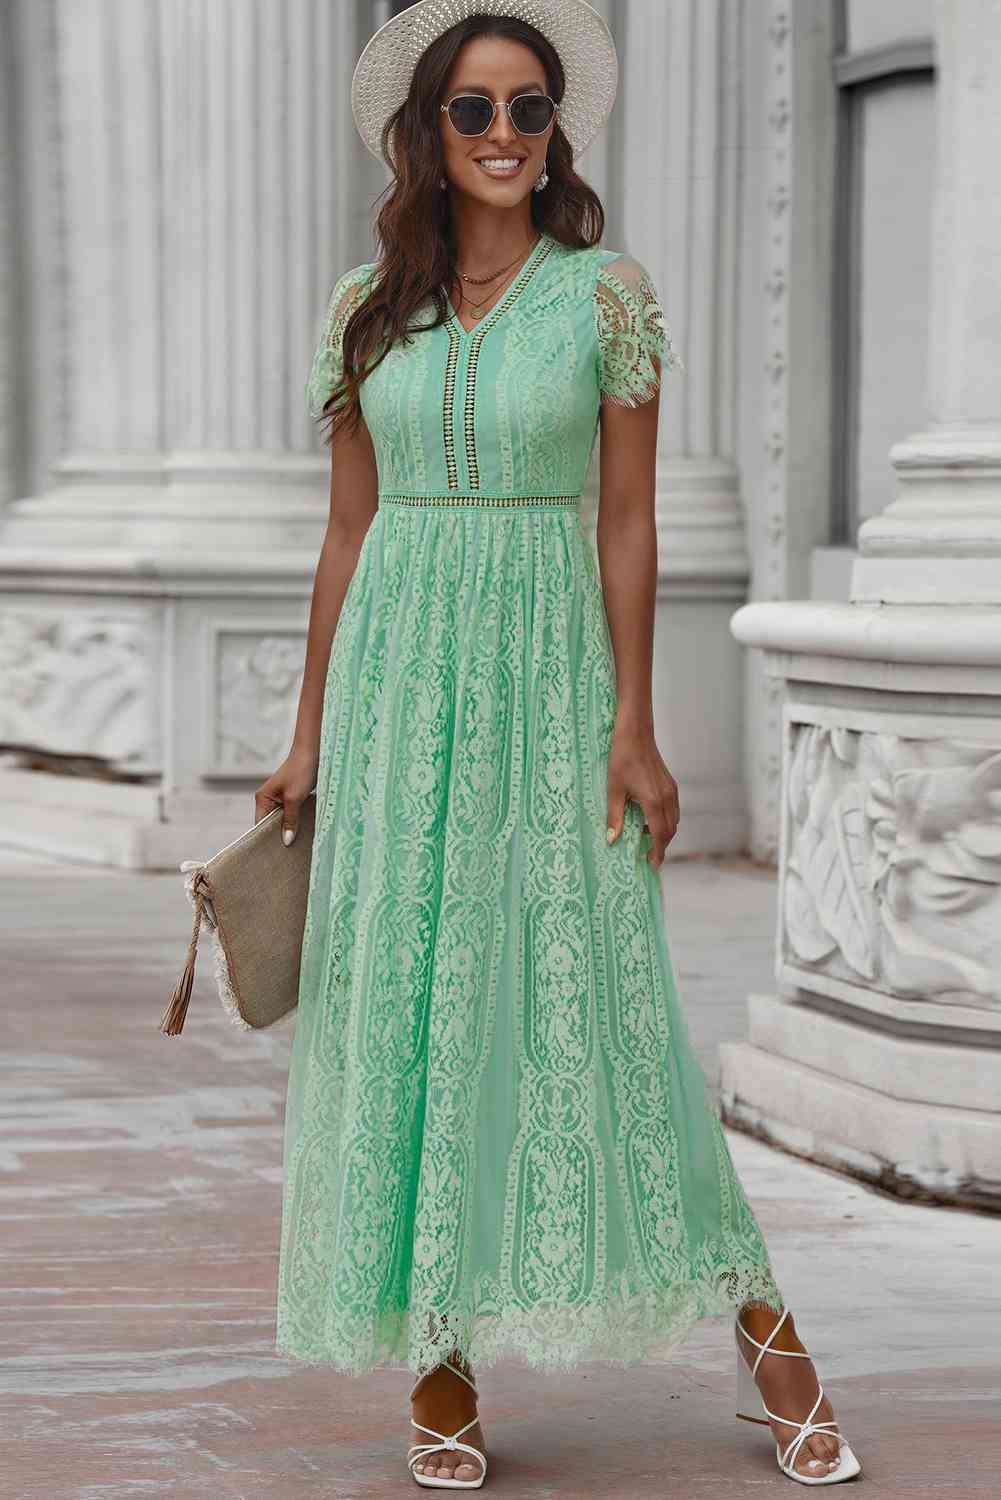 Scalloped Trim Lace Plunge Dress - Mid Green / S - All Dresses - Dresses - 16 - 2024